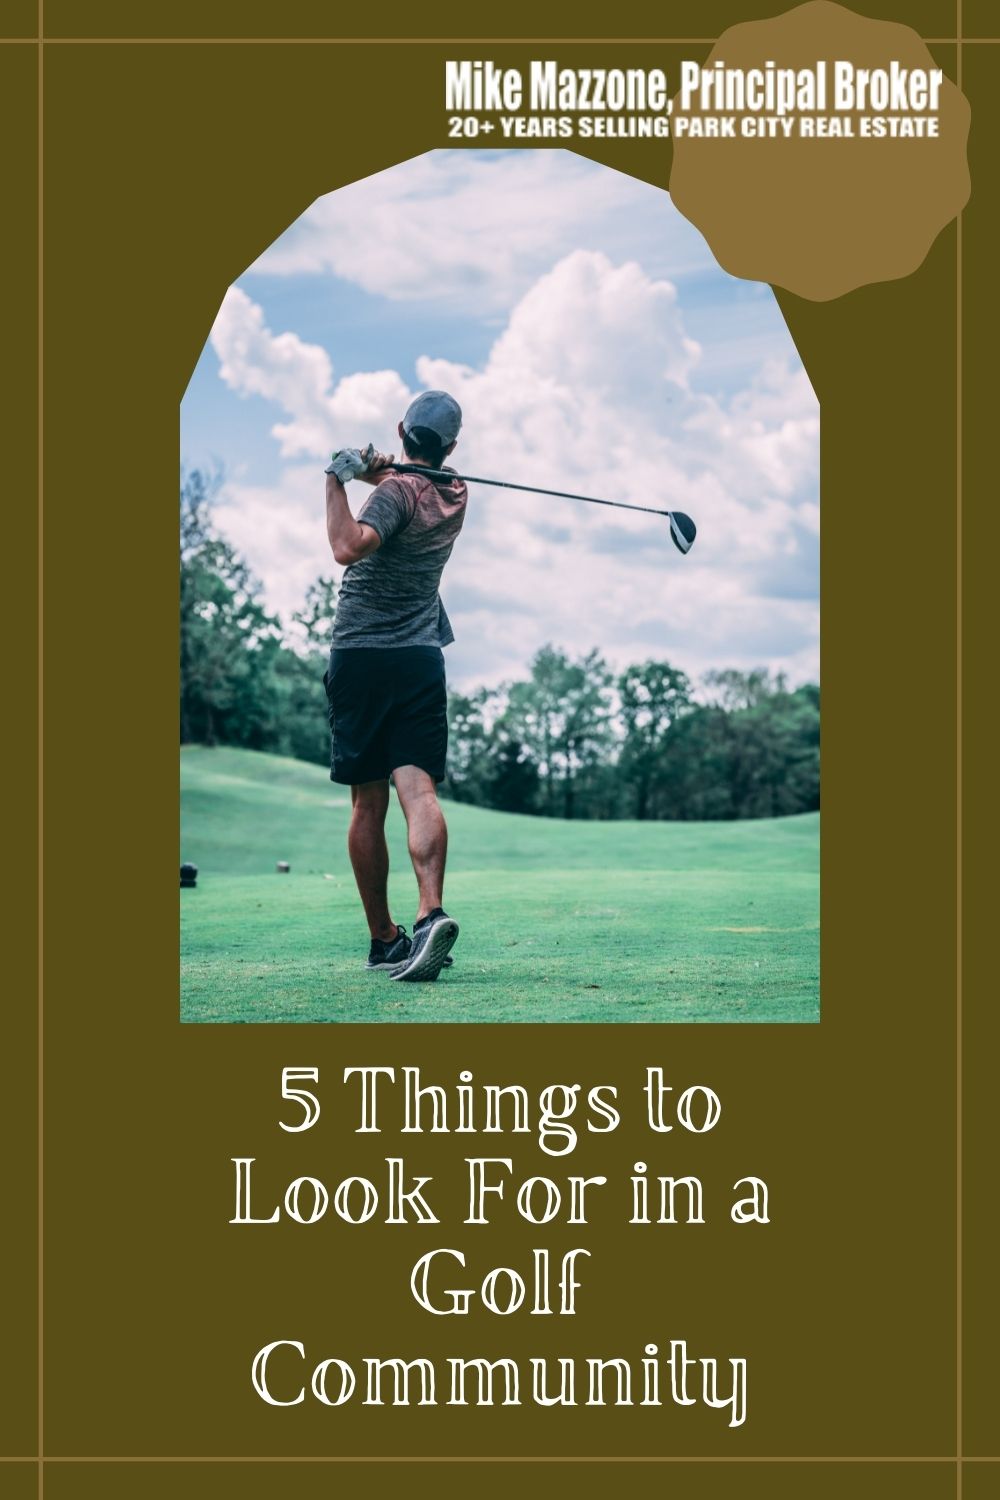 5 Things to Look For in a Golf Community